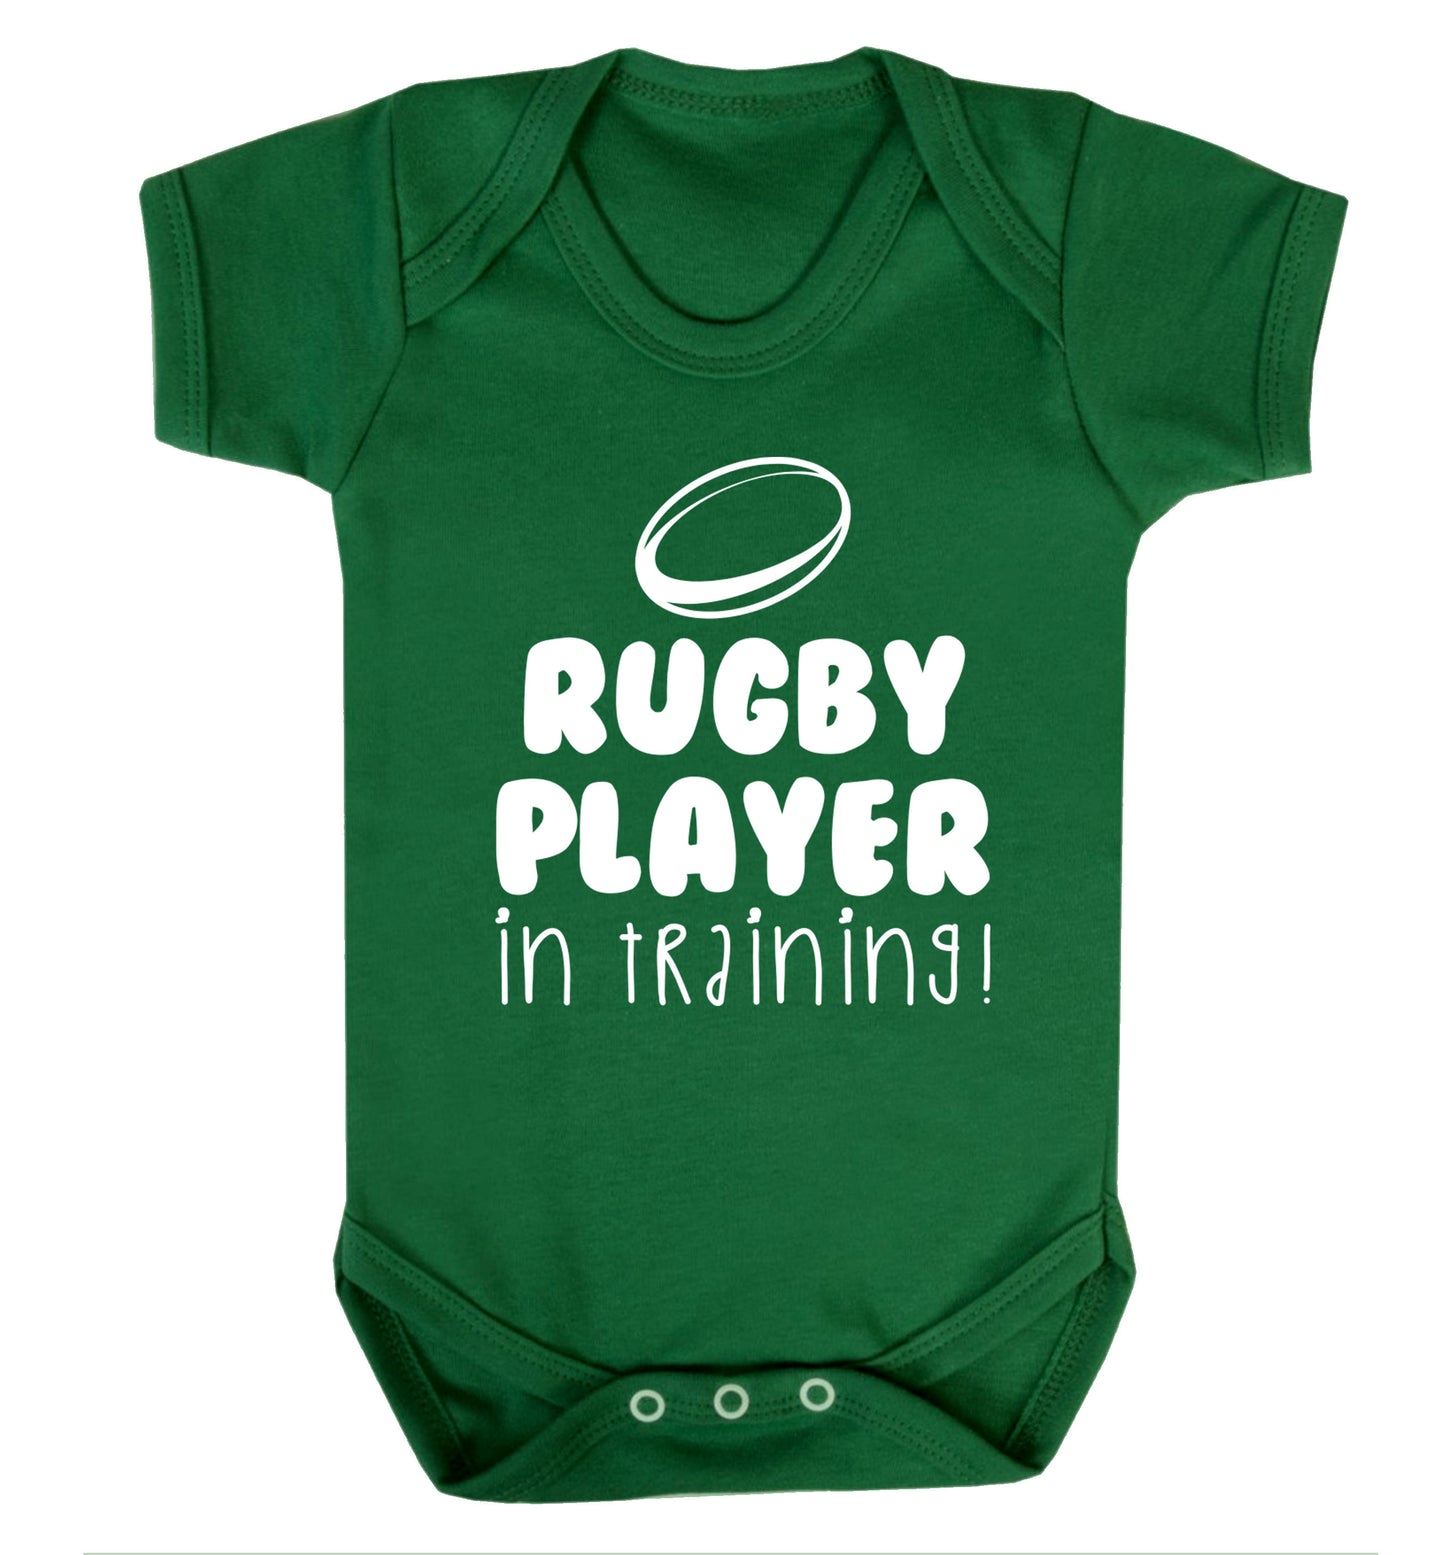 Rugby player in training Baby Vest green 18-24 months